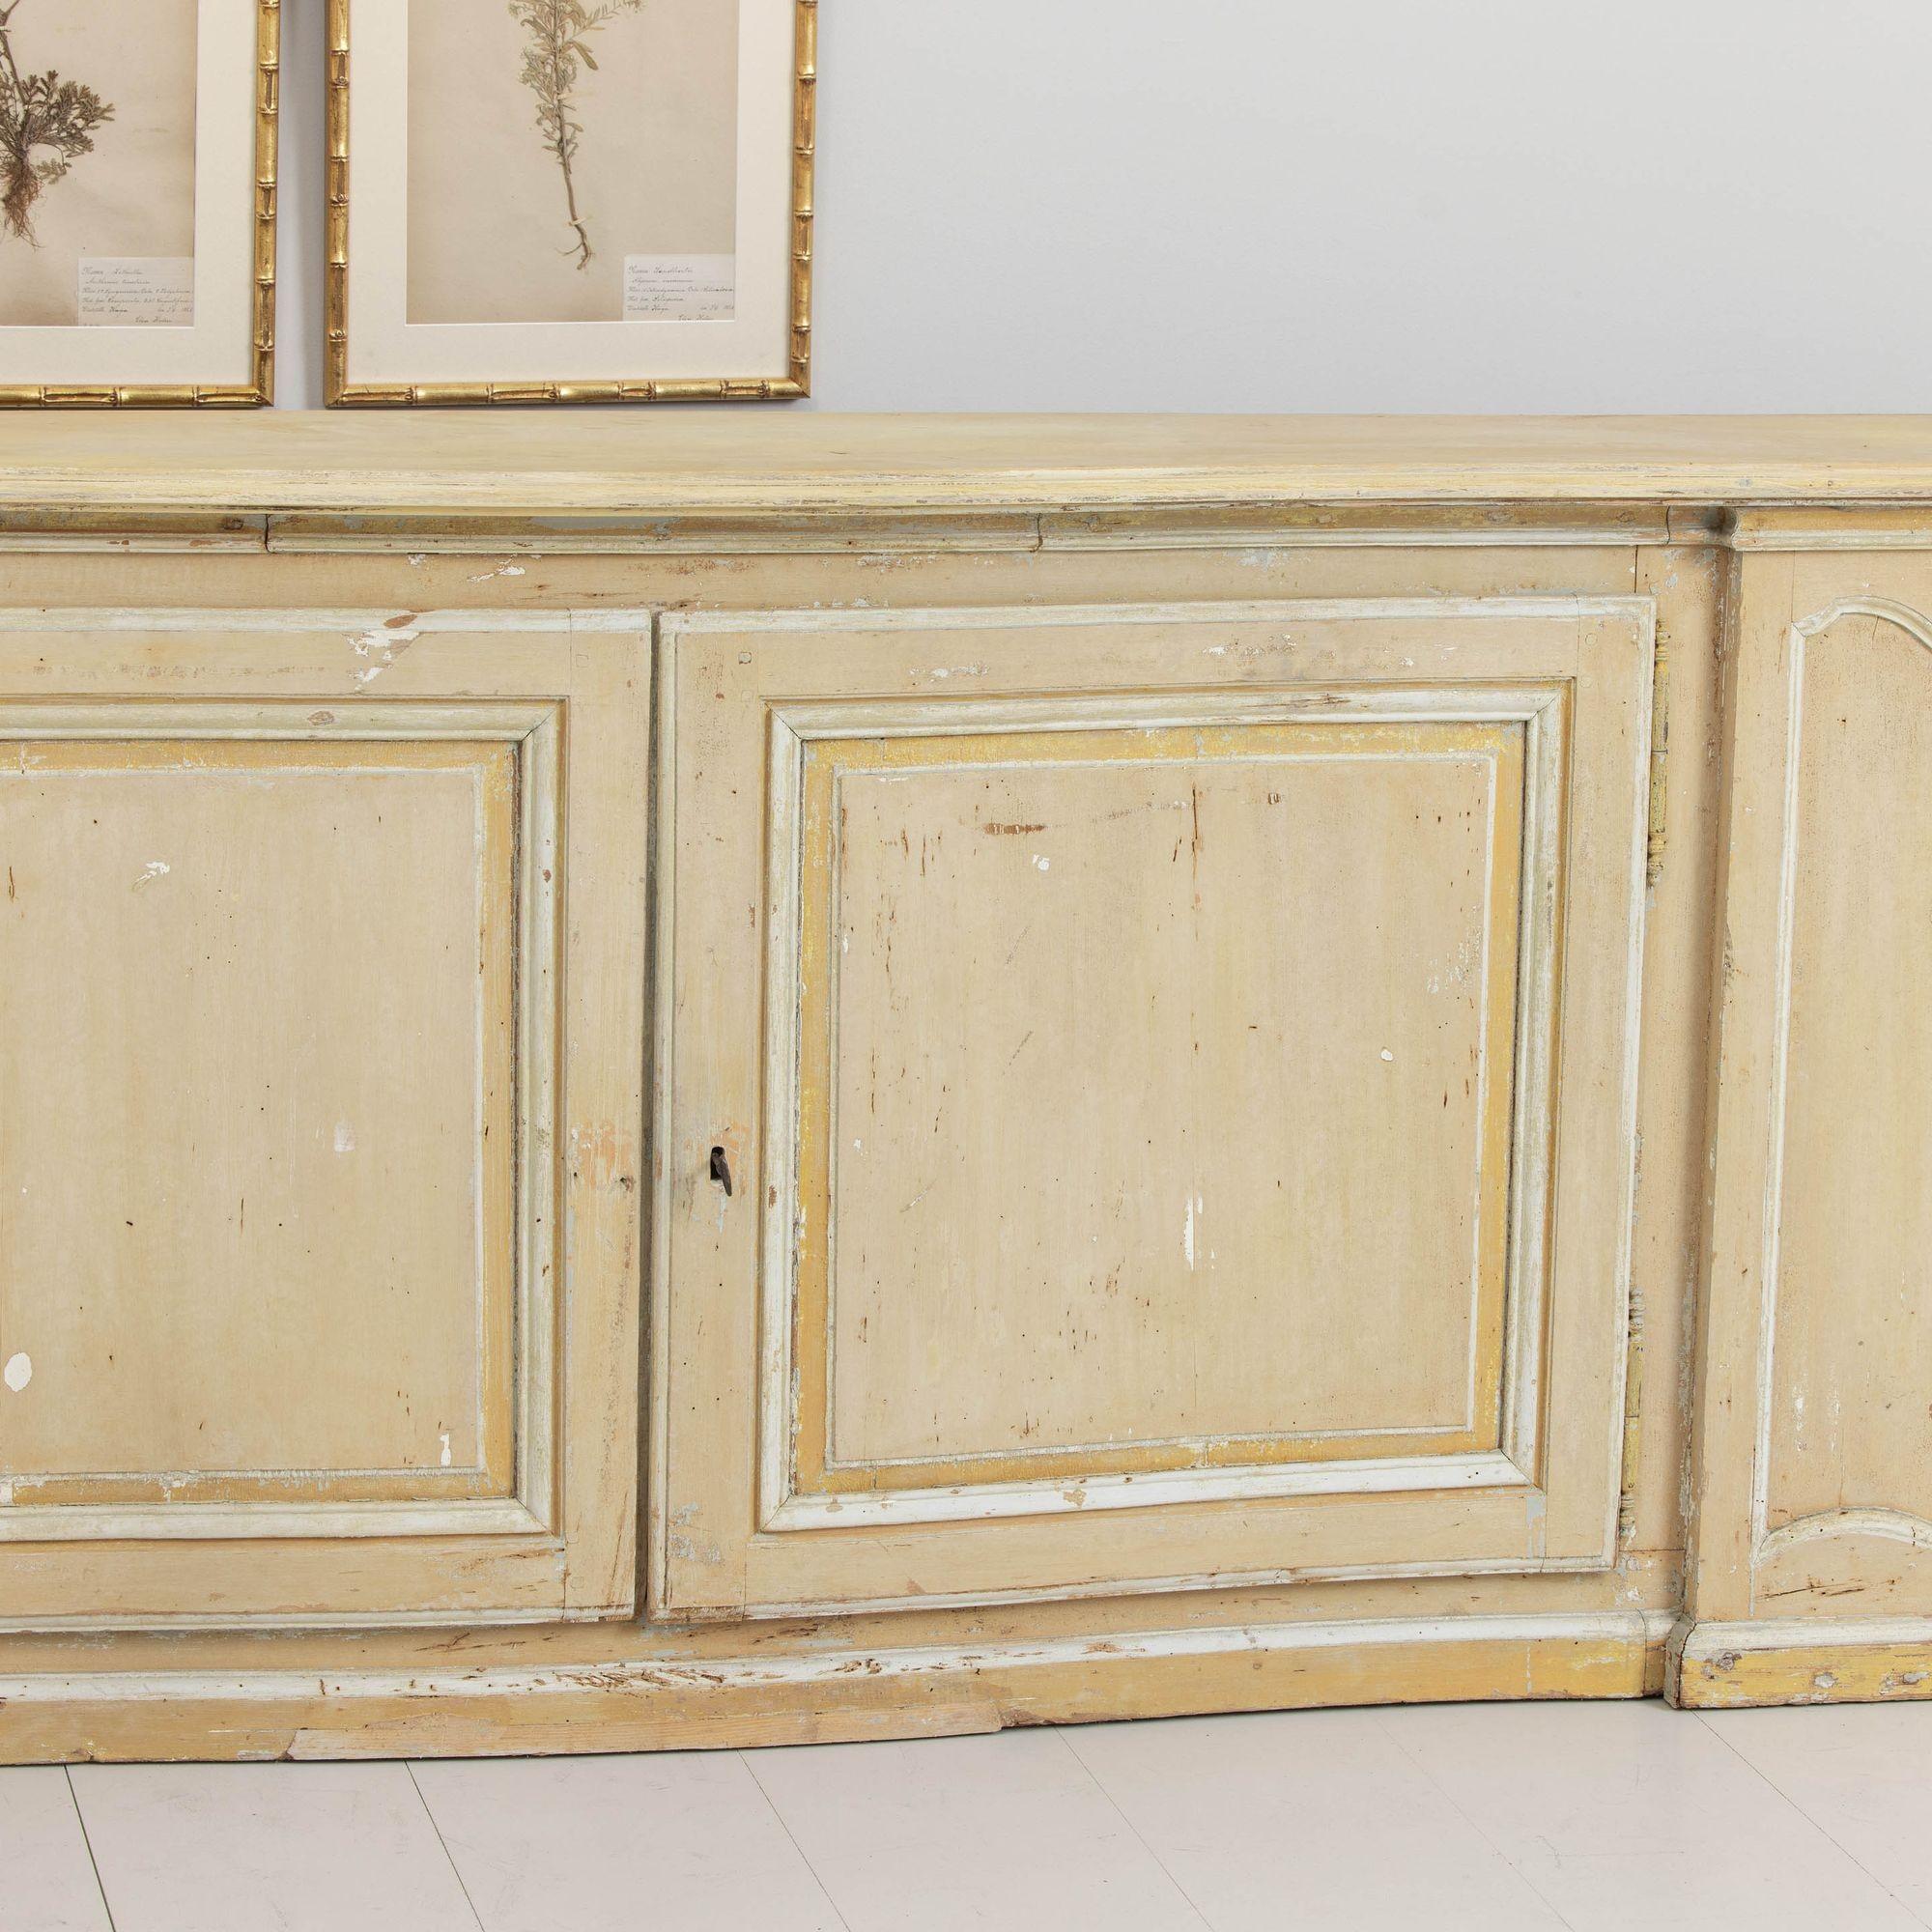 19th Century 19th c. French Provençal Serpentine Front Enfilade in Original Yellow Paint For Sale